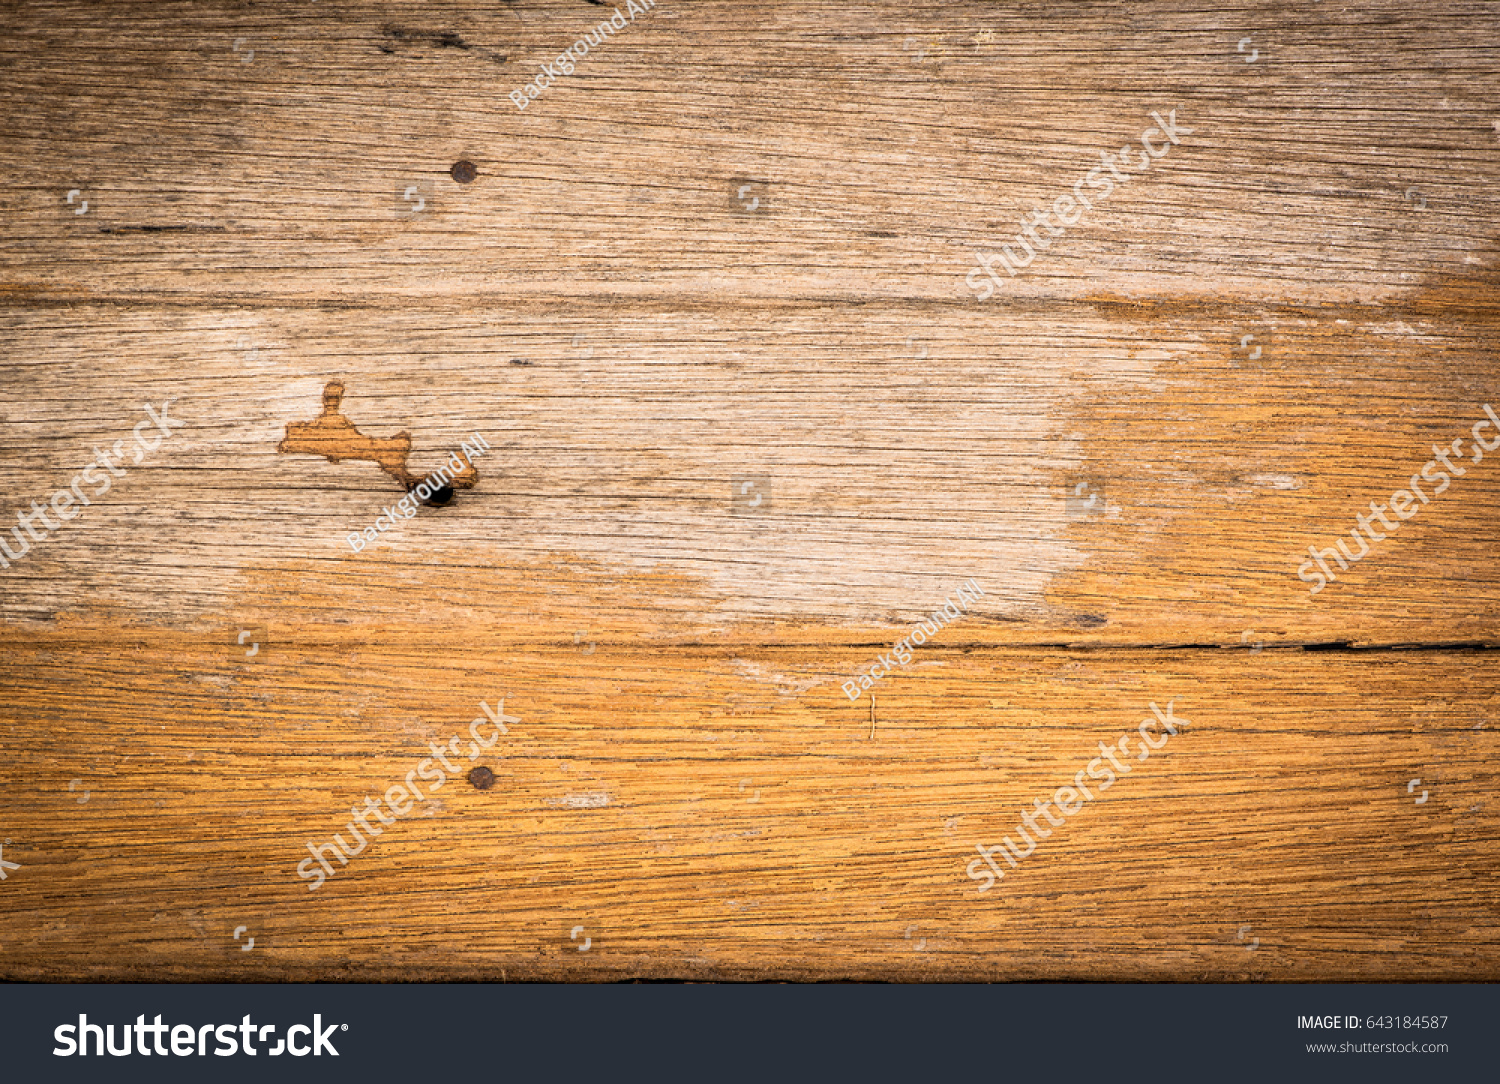 Old brown wooden boards, background #643184587